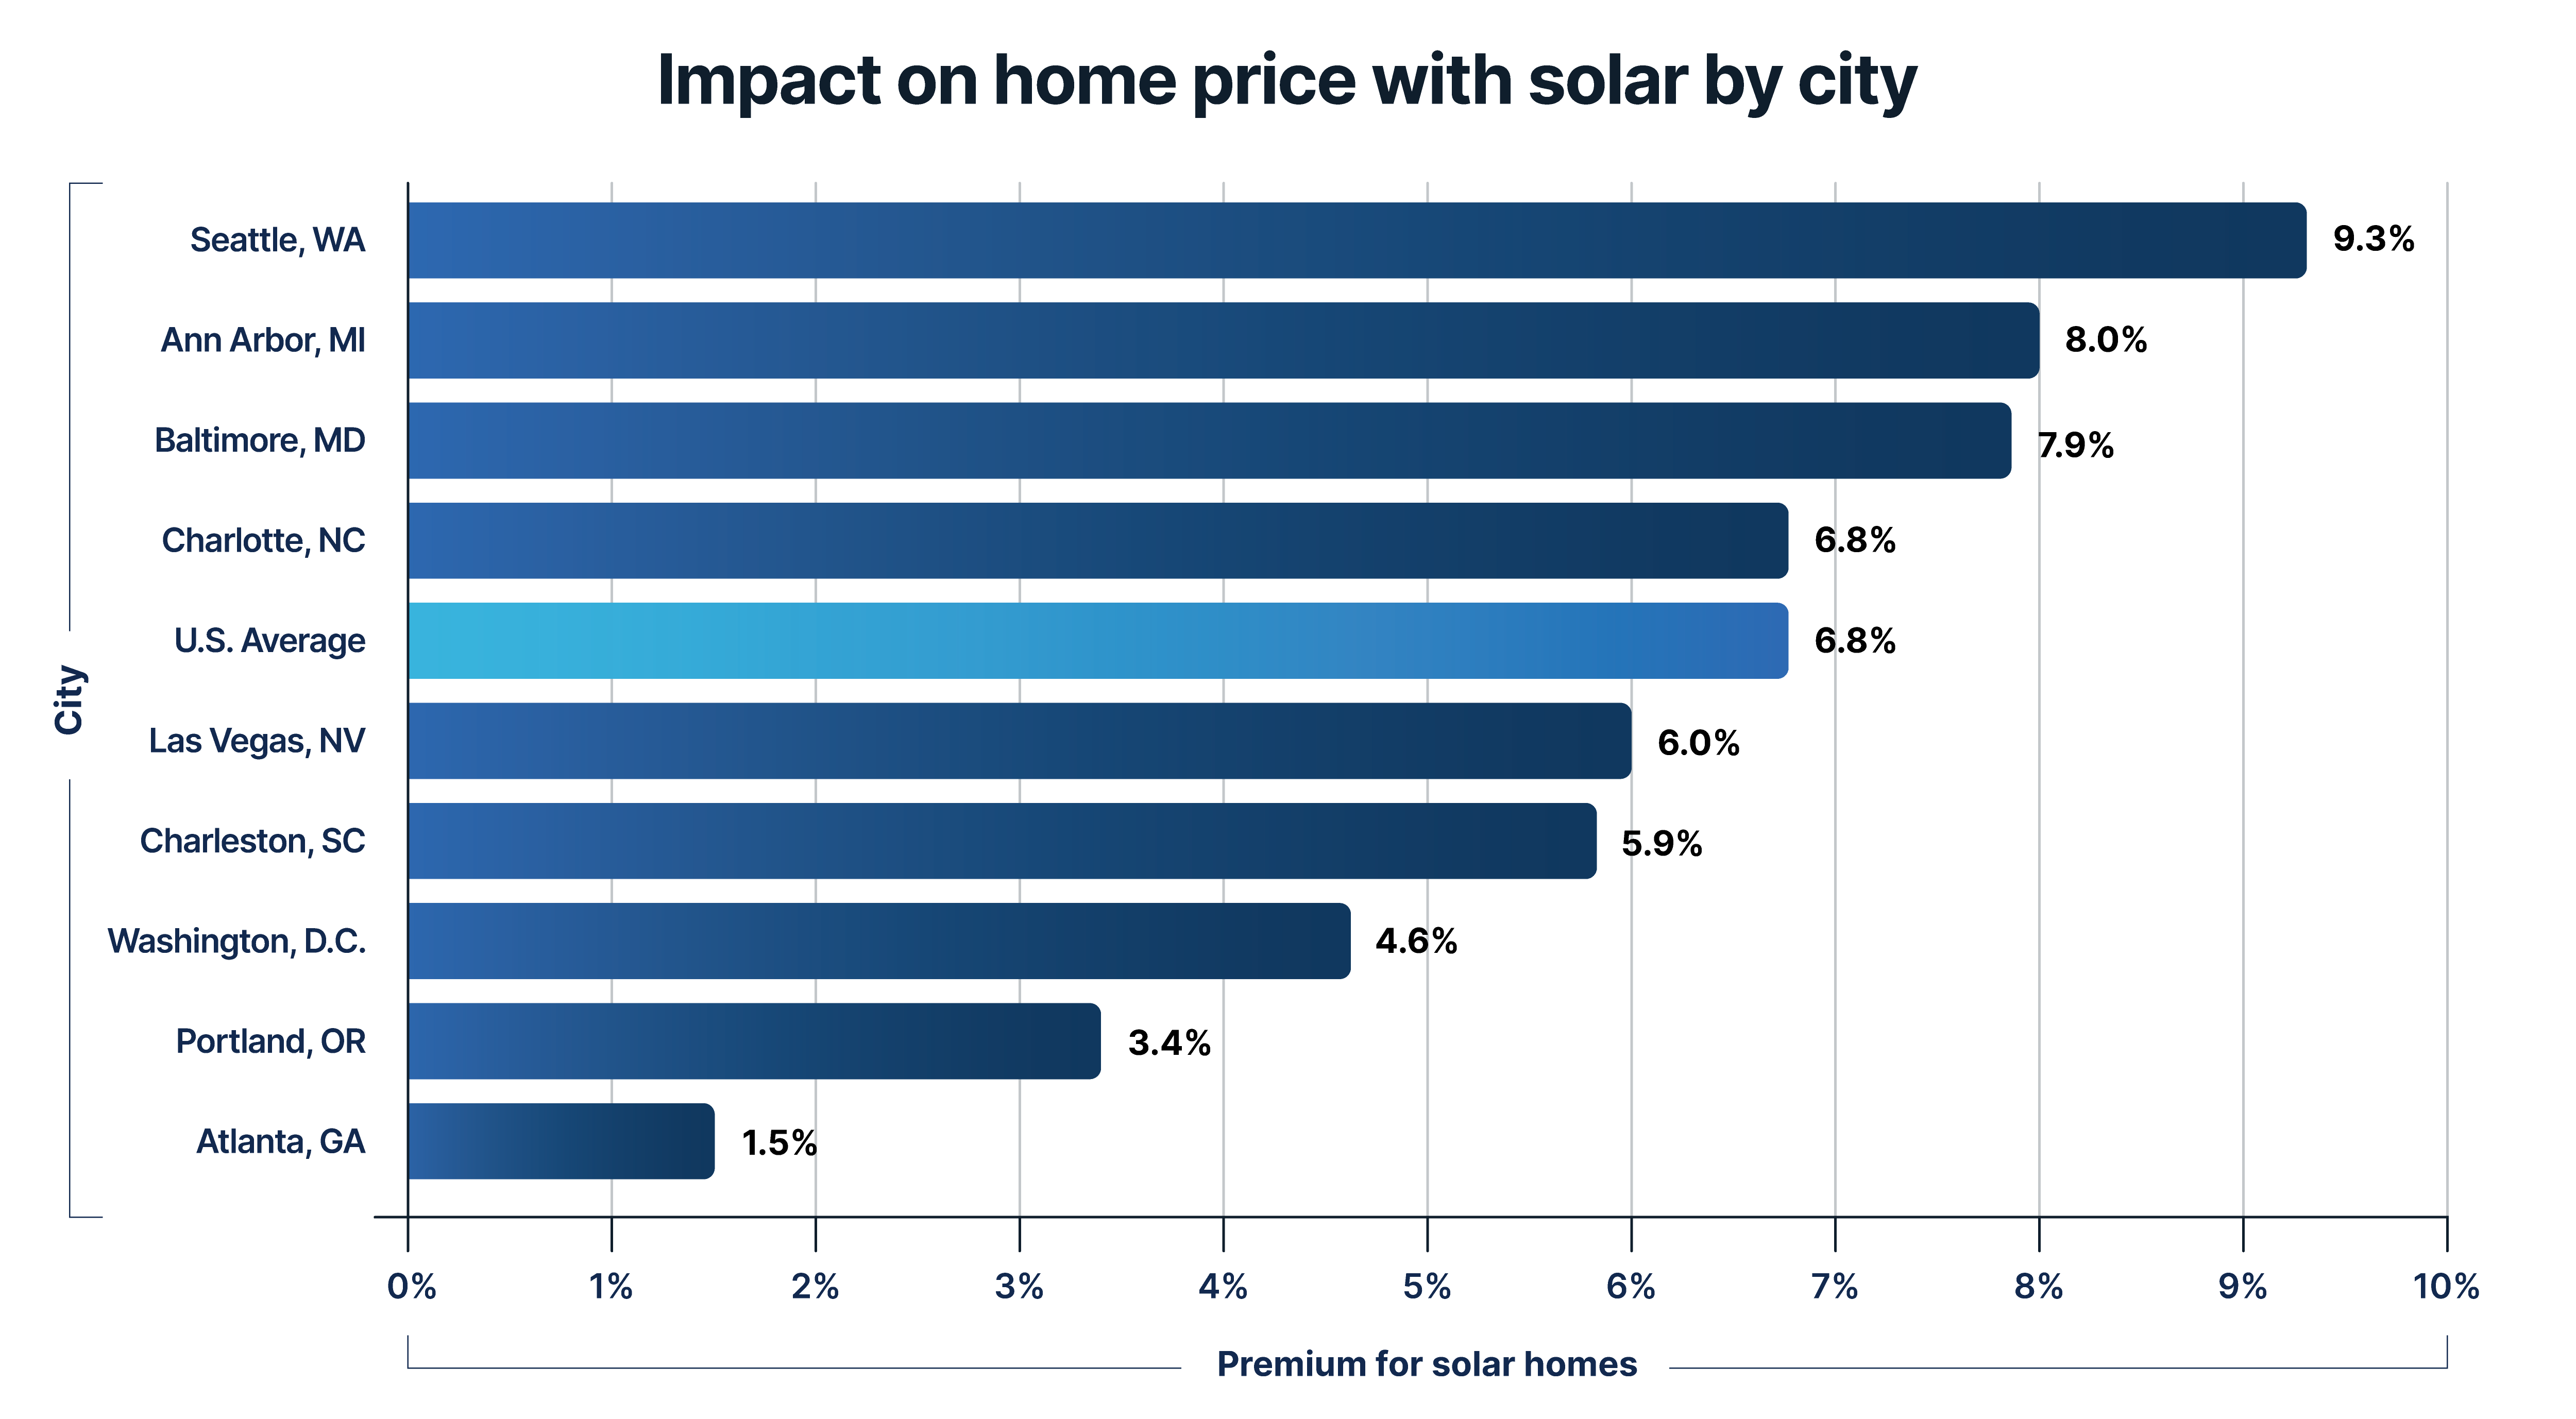 Bar graph comparing the impact solar panels had on home prices between cities. Ranging between a -1.5% premium in Atlanta, Georiga, and a 9.3% premium in Seattle, Washington. 
